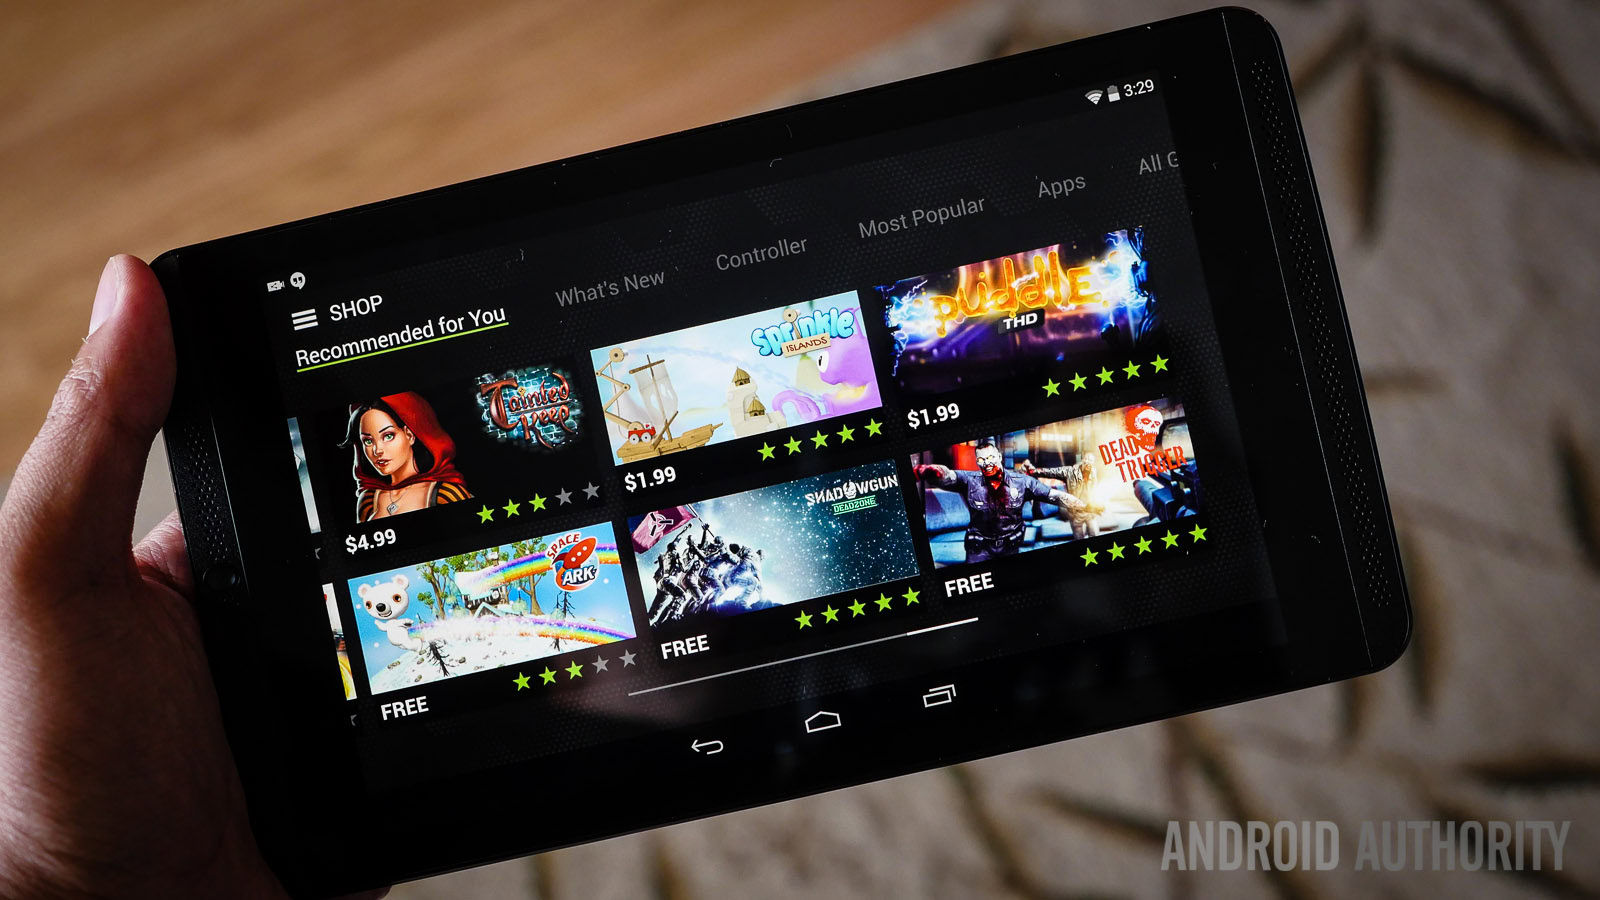 nvidia shield tablet first impressions (9 of 9)